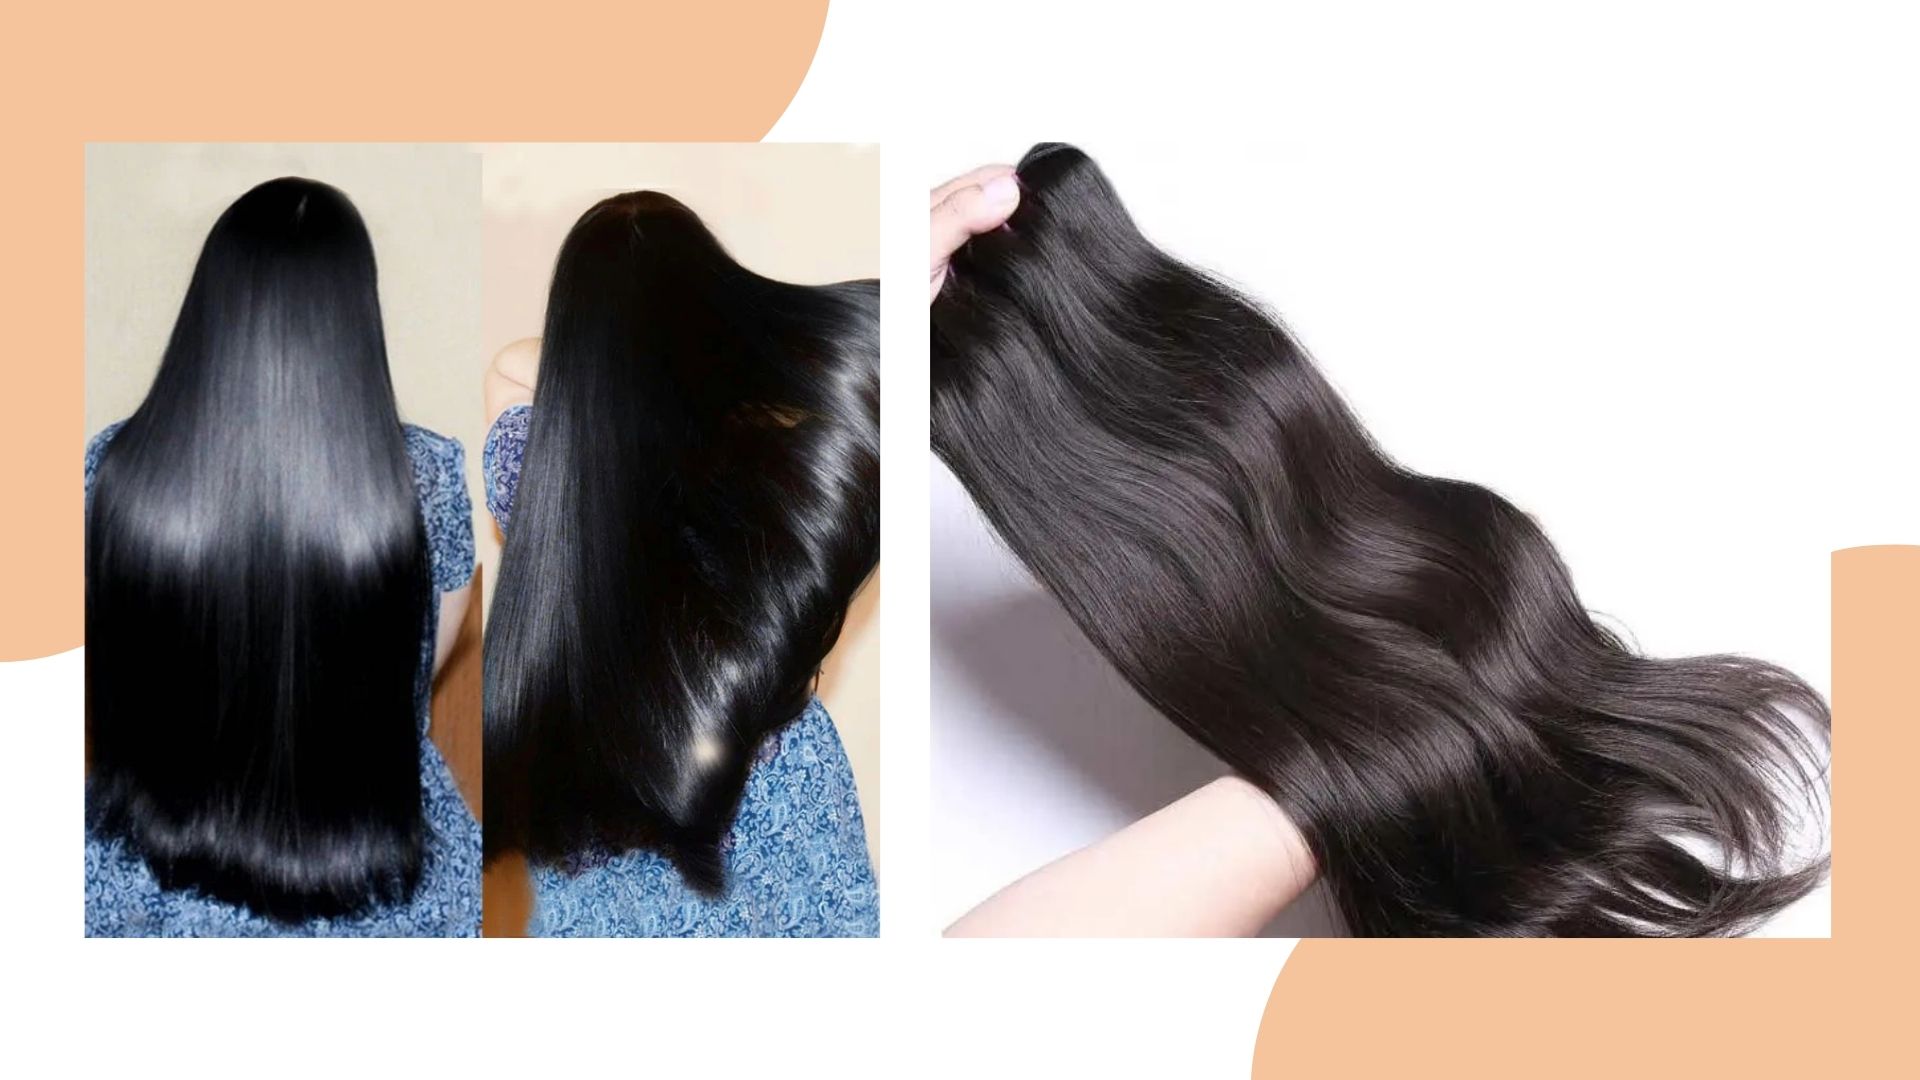 Vietnamese hair review: the most comprehensive and unbiased review